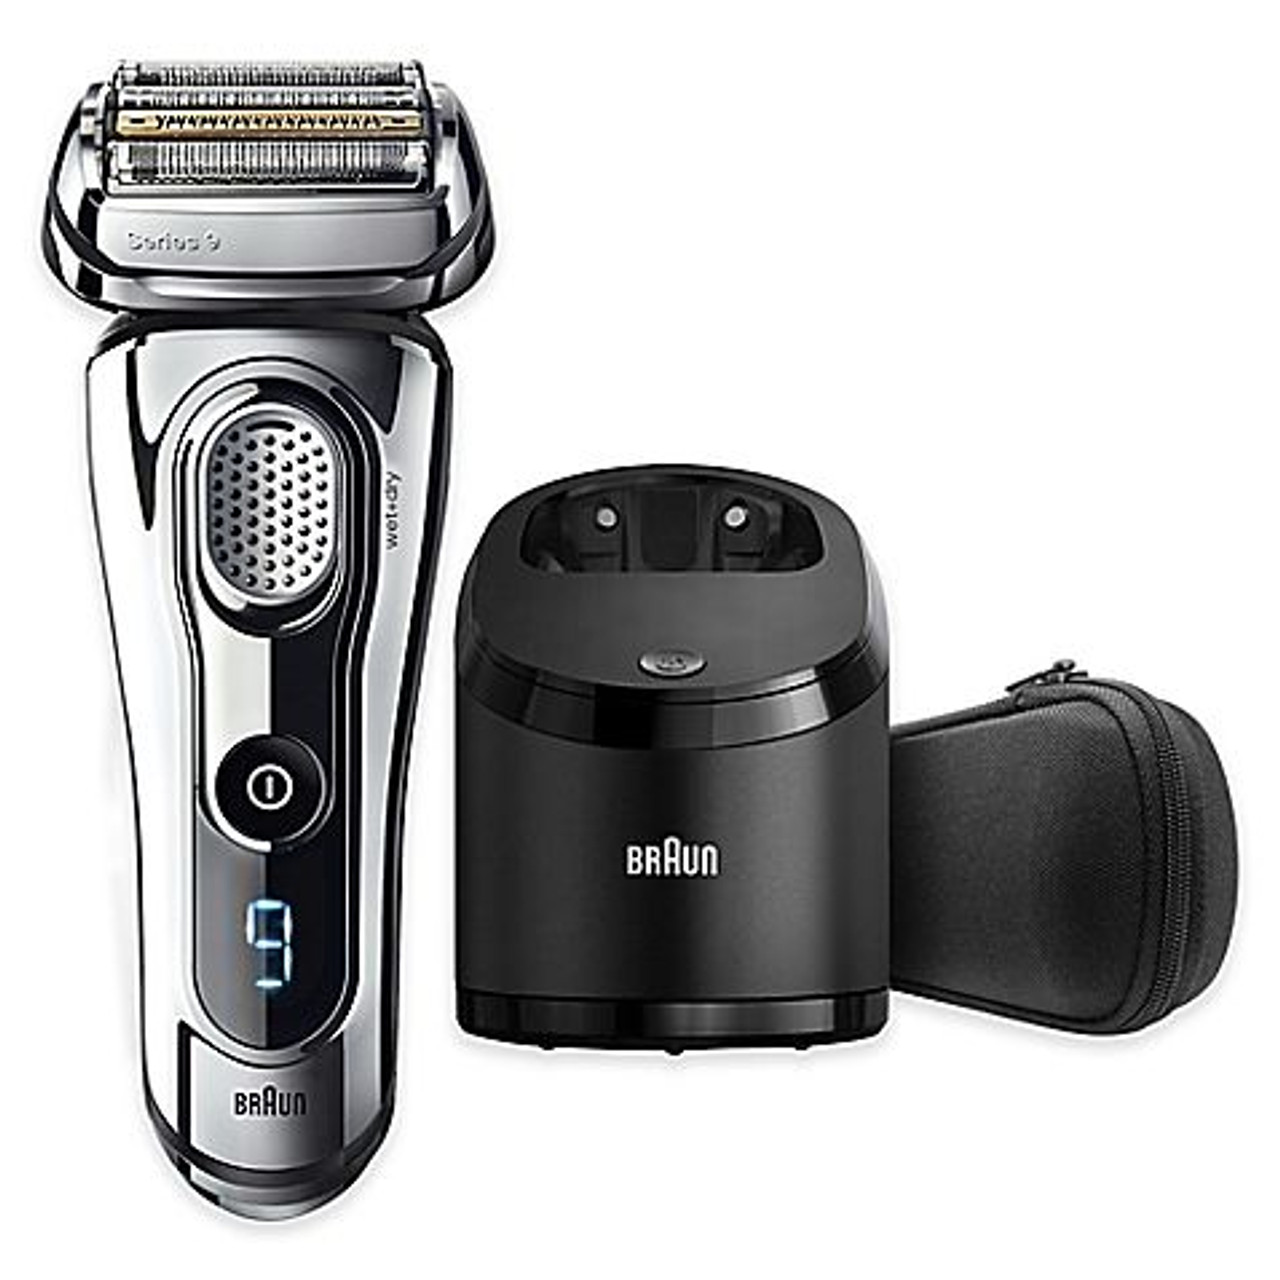 https://cdn11.bigcommerce.com/s-r1ds5cvocb/images/stencil/1280x1280/products/470/769/braun-series-9-9370cc-wet-and-dry-self-cleaning-electric-shaver-7__92784.1675363545.jpg?c=1